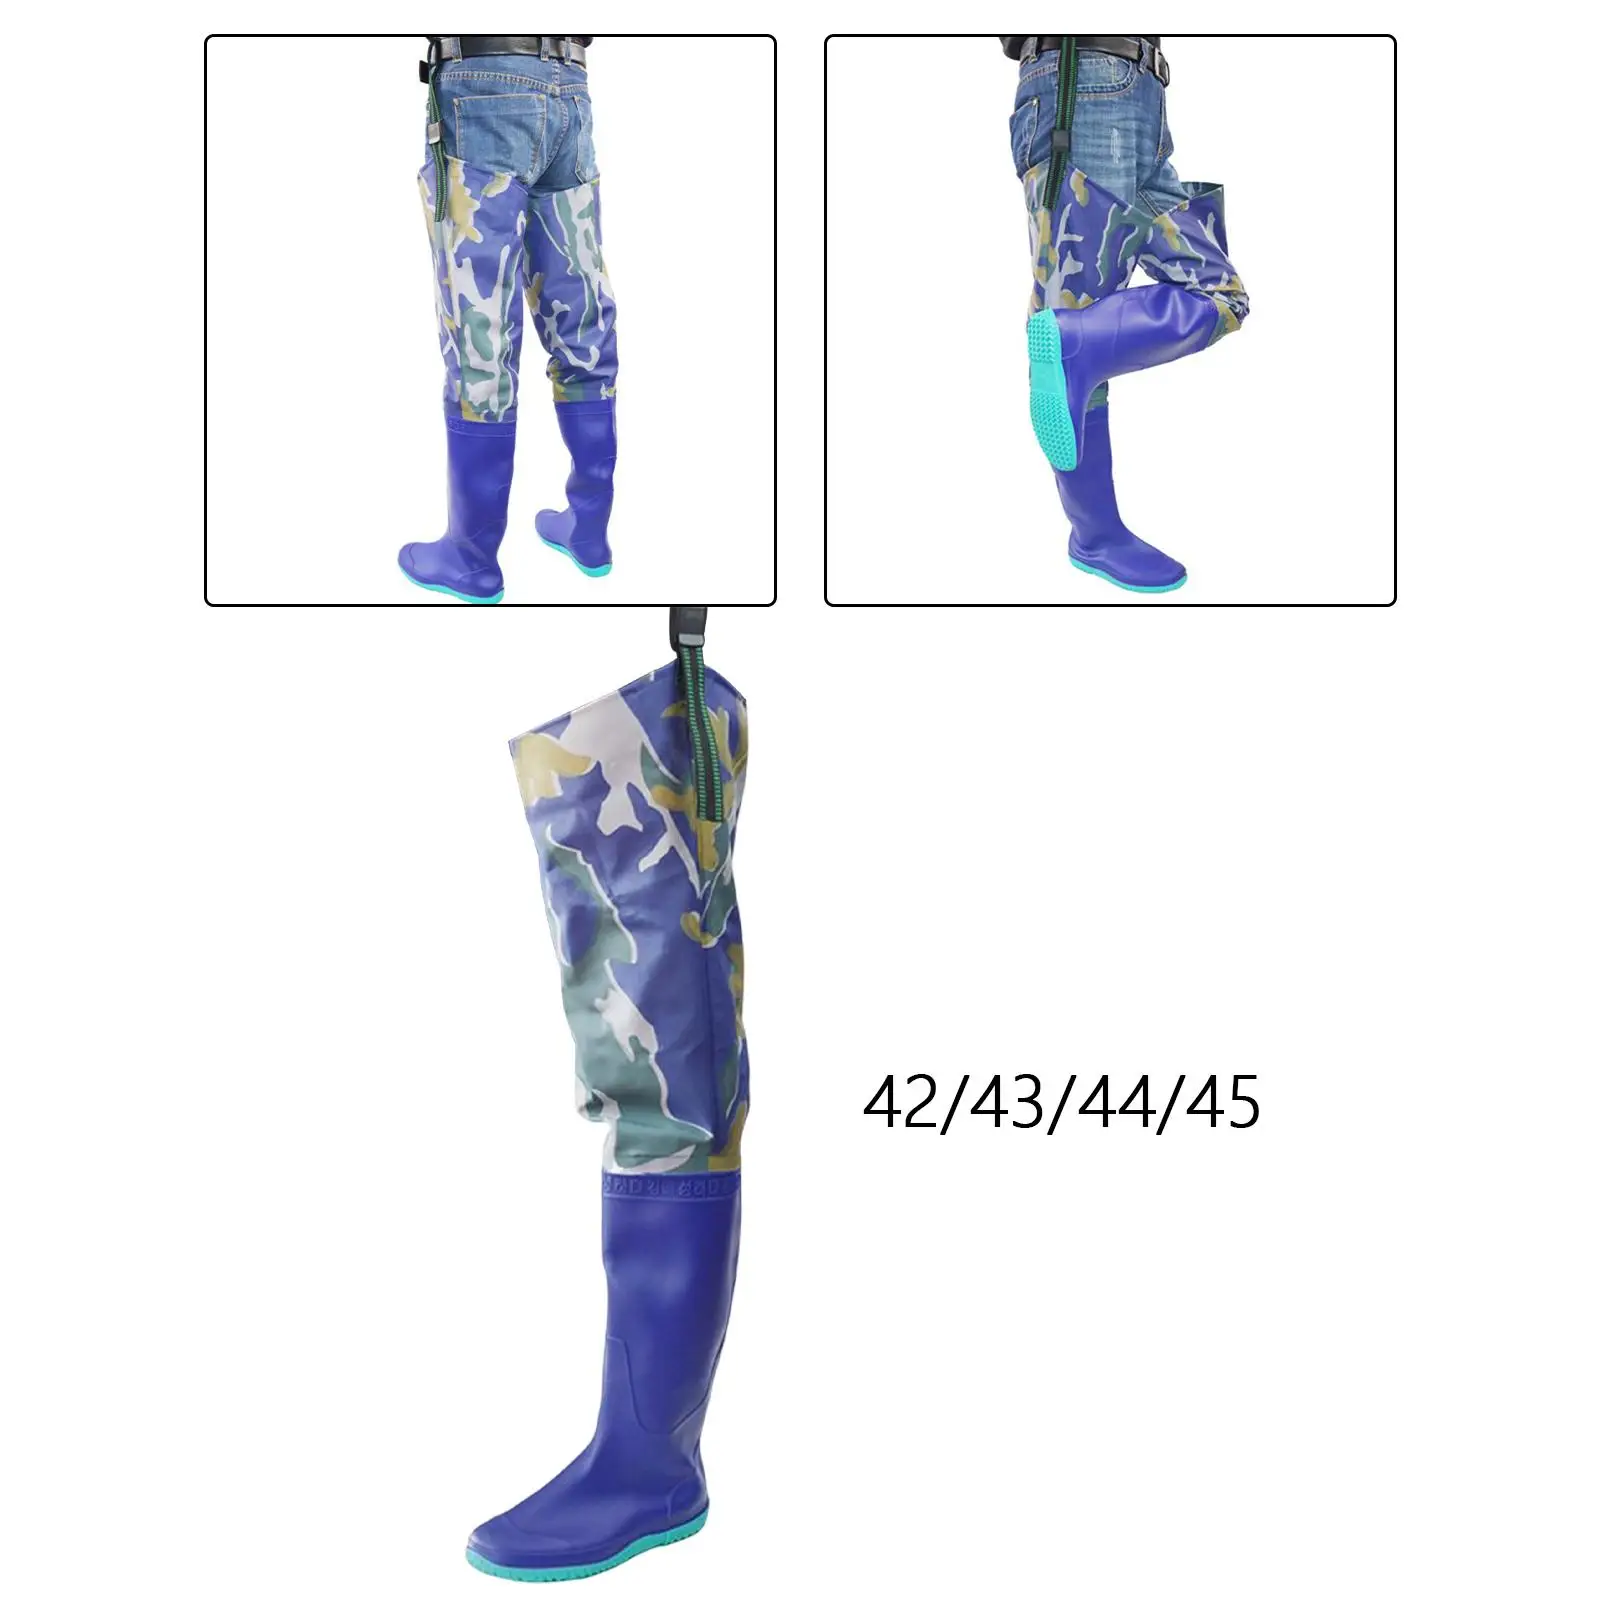 Hip Waders Waterproof Hip Boots Non Slip Men Women Wading Pants Bootfoot Wellies Thigh Waders Wading Trousers for Fishing Wading